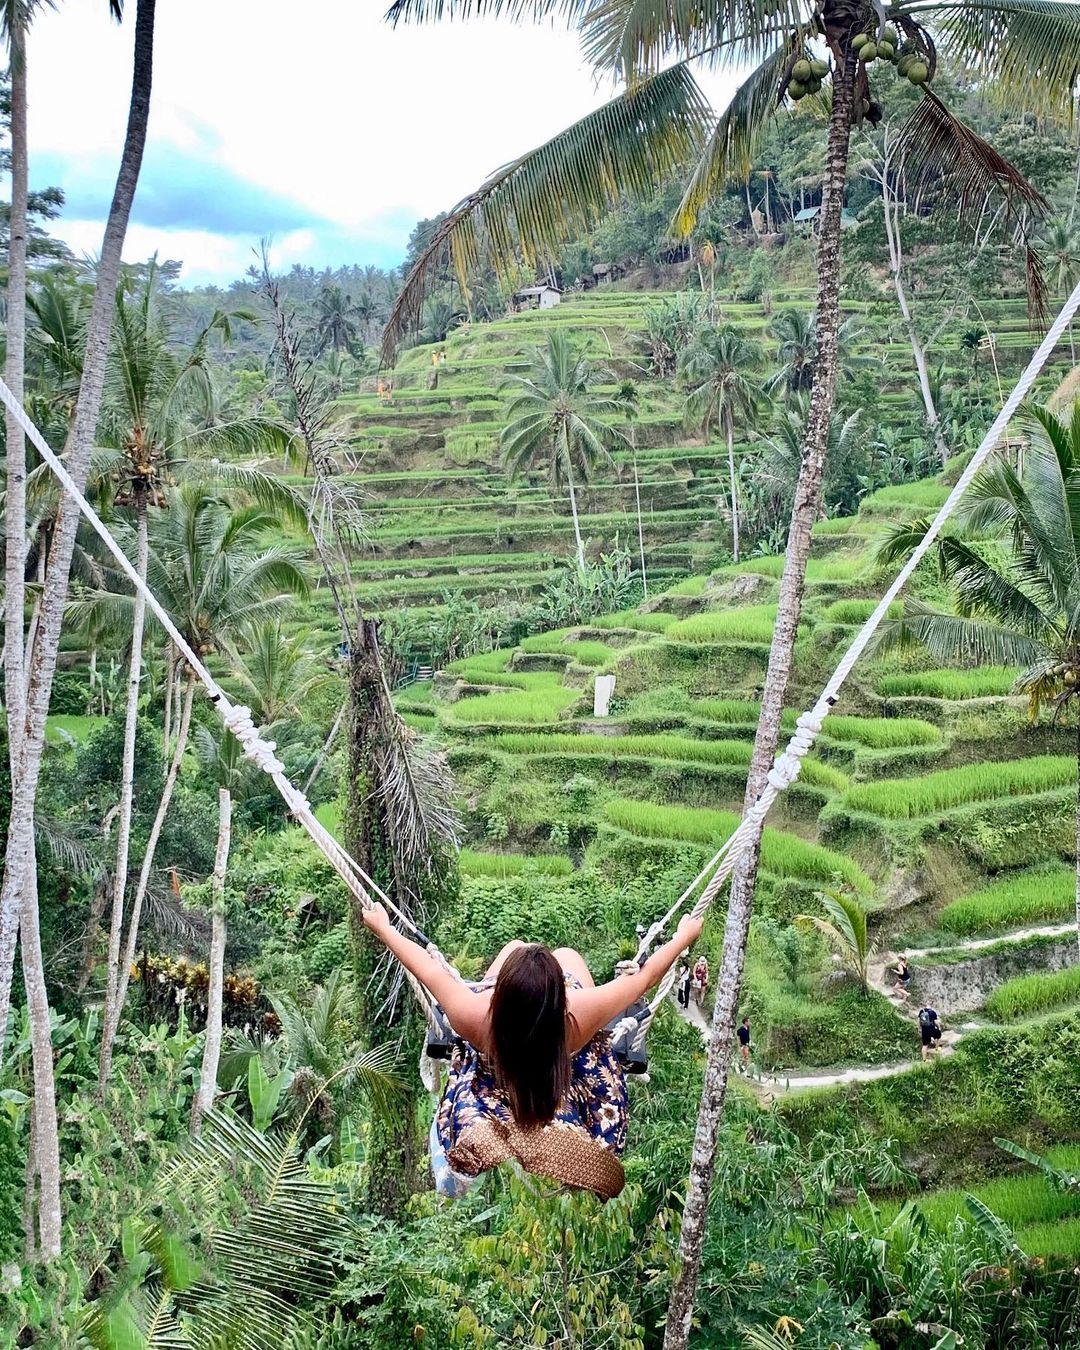 bali must places to visit